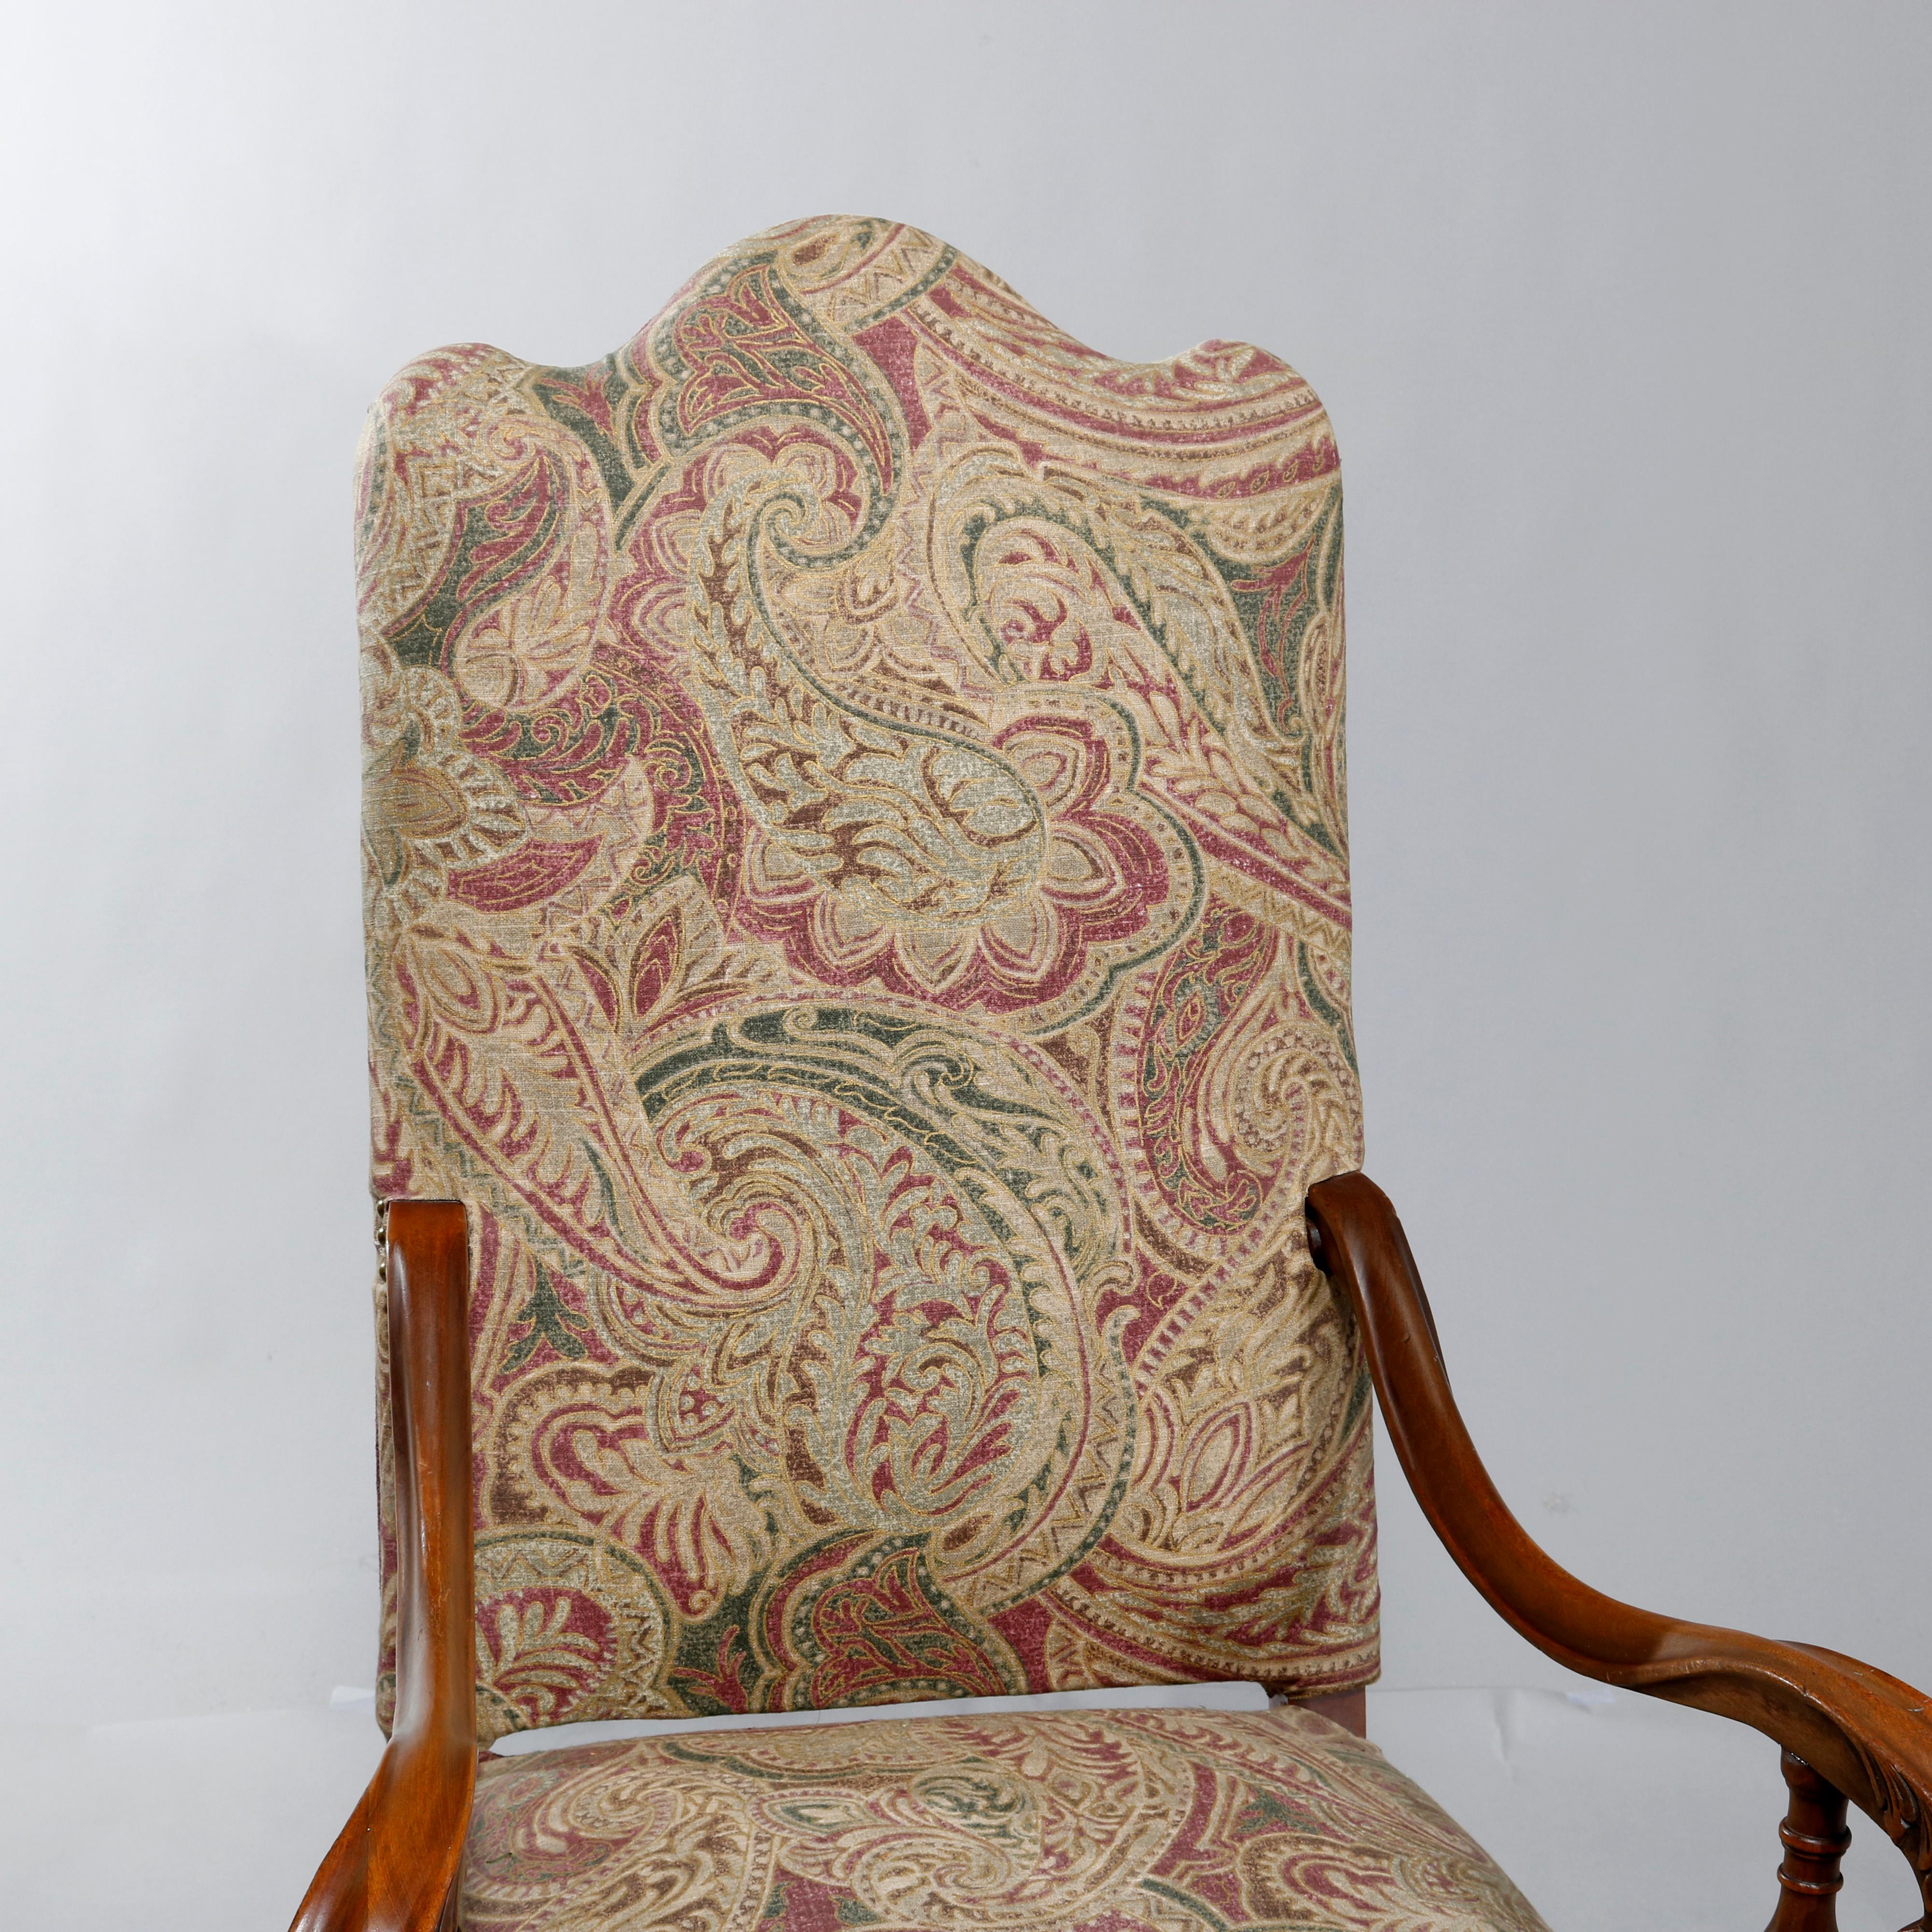 20th Century Antique Italian Renaissance Revival Style Carved Walnut Throne Chair, circa 1900 For Sale